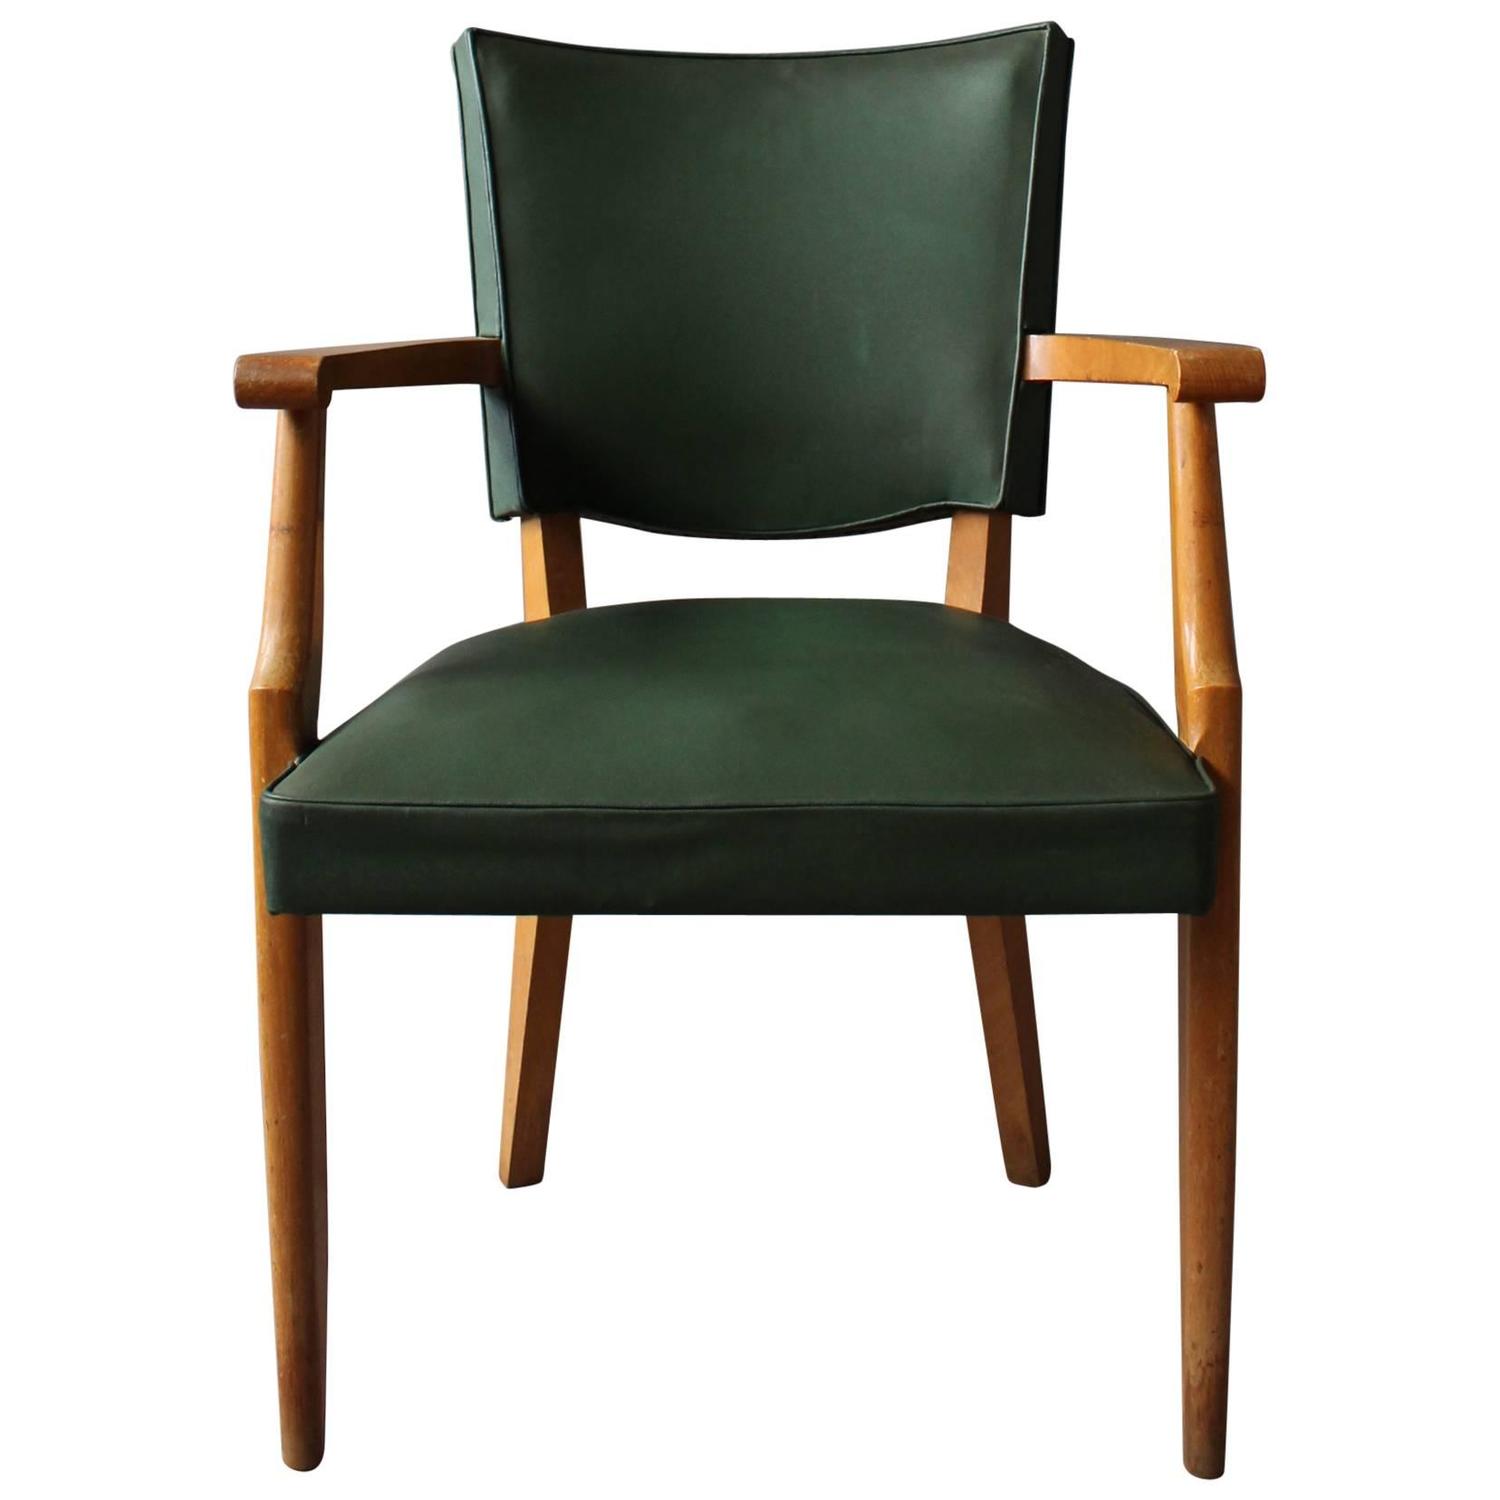 French Art Deco Desk Chair For Sale at 1stdibs